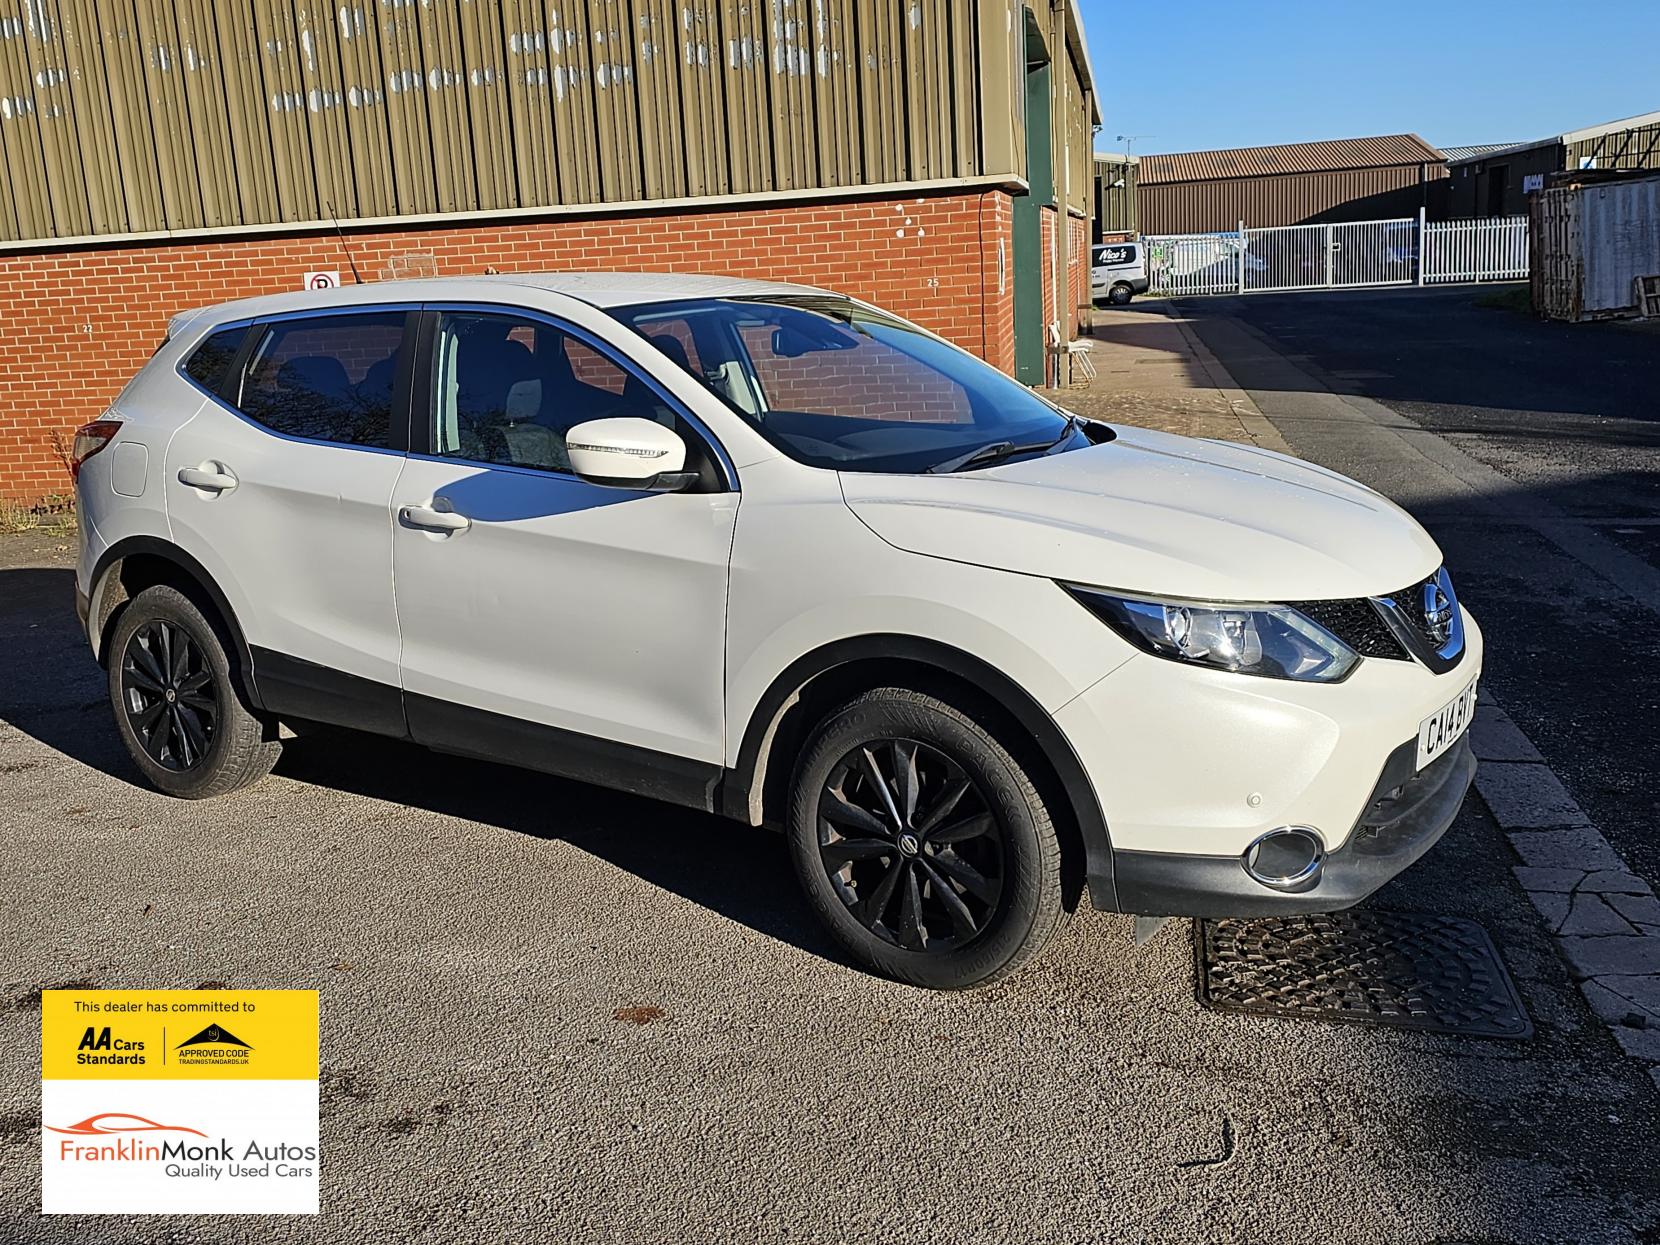 Nissan Qashqai 1.5 dCi Acenta SUV 5dr Diesel Manual 2WD Euro 5 (s/s) (110 ps)